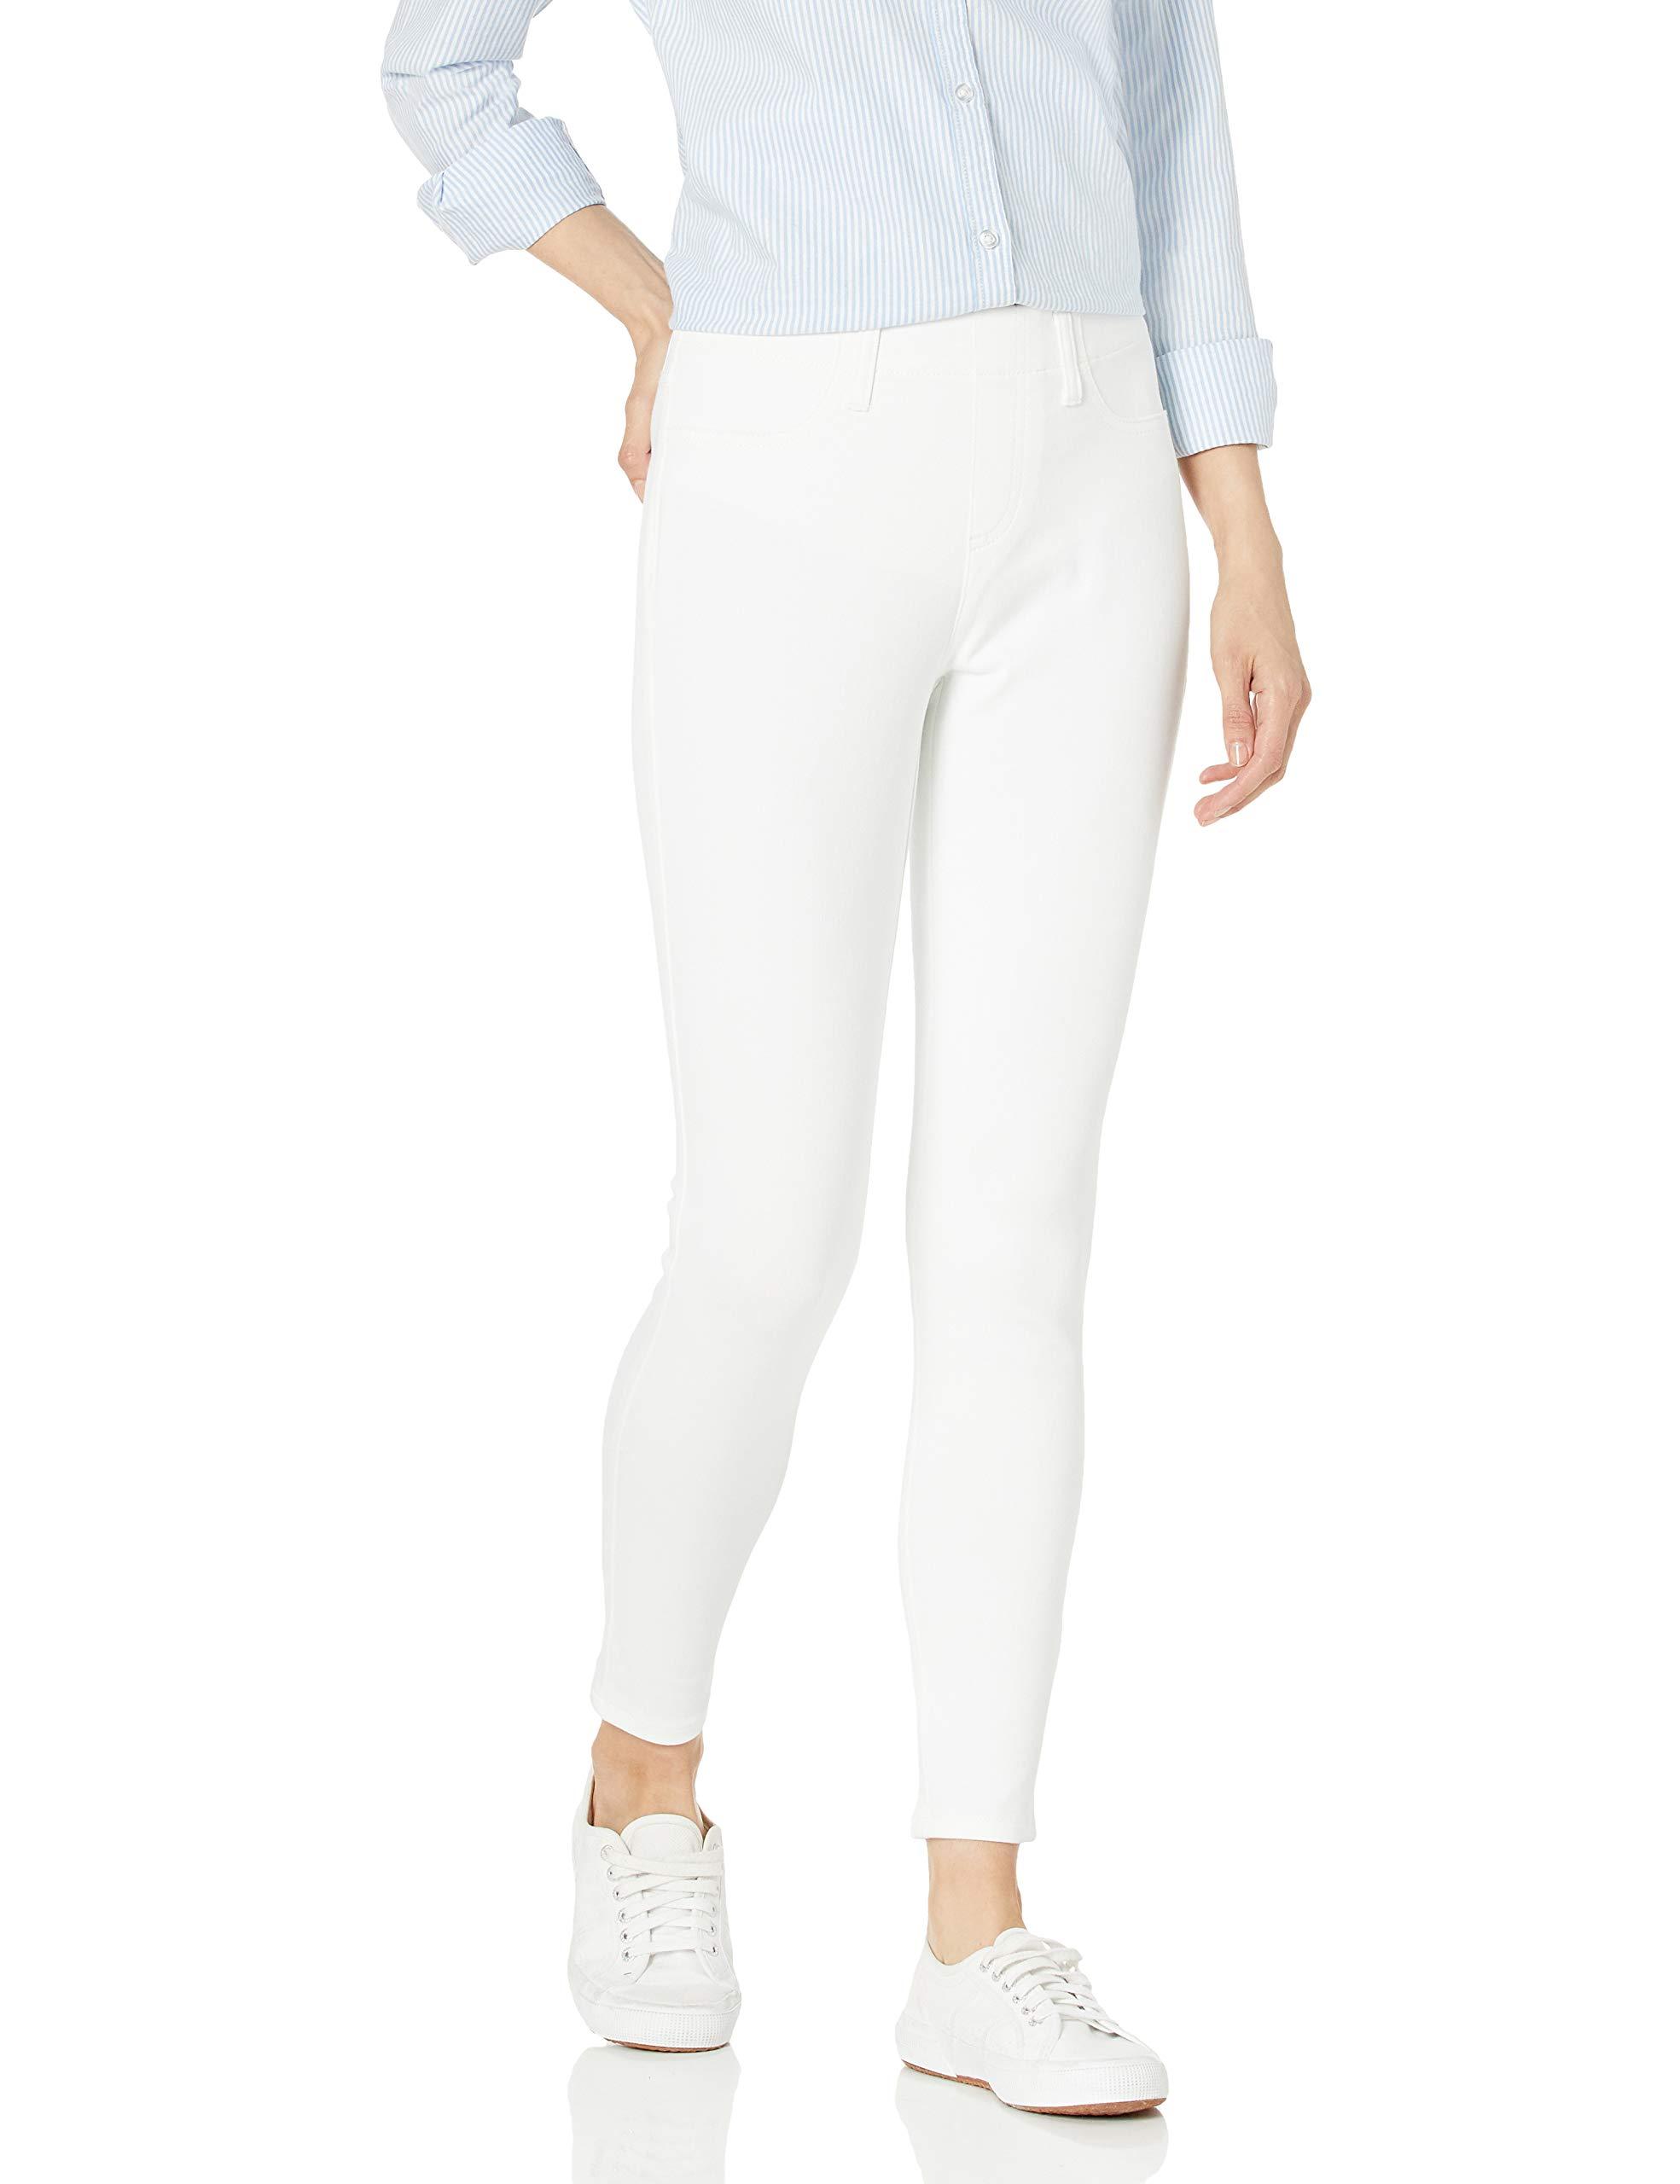 Essentials Women's Pull-On Knit Jegging 